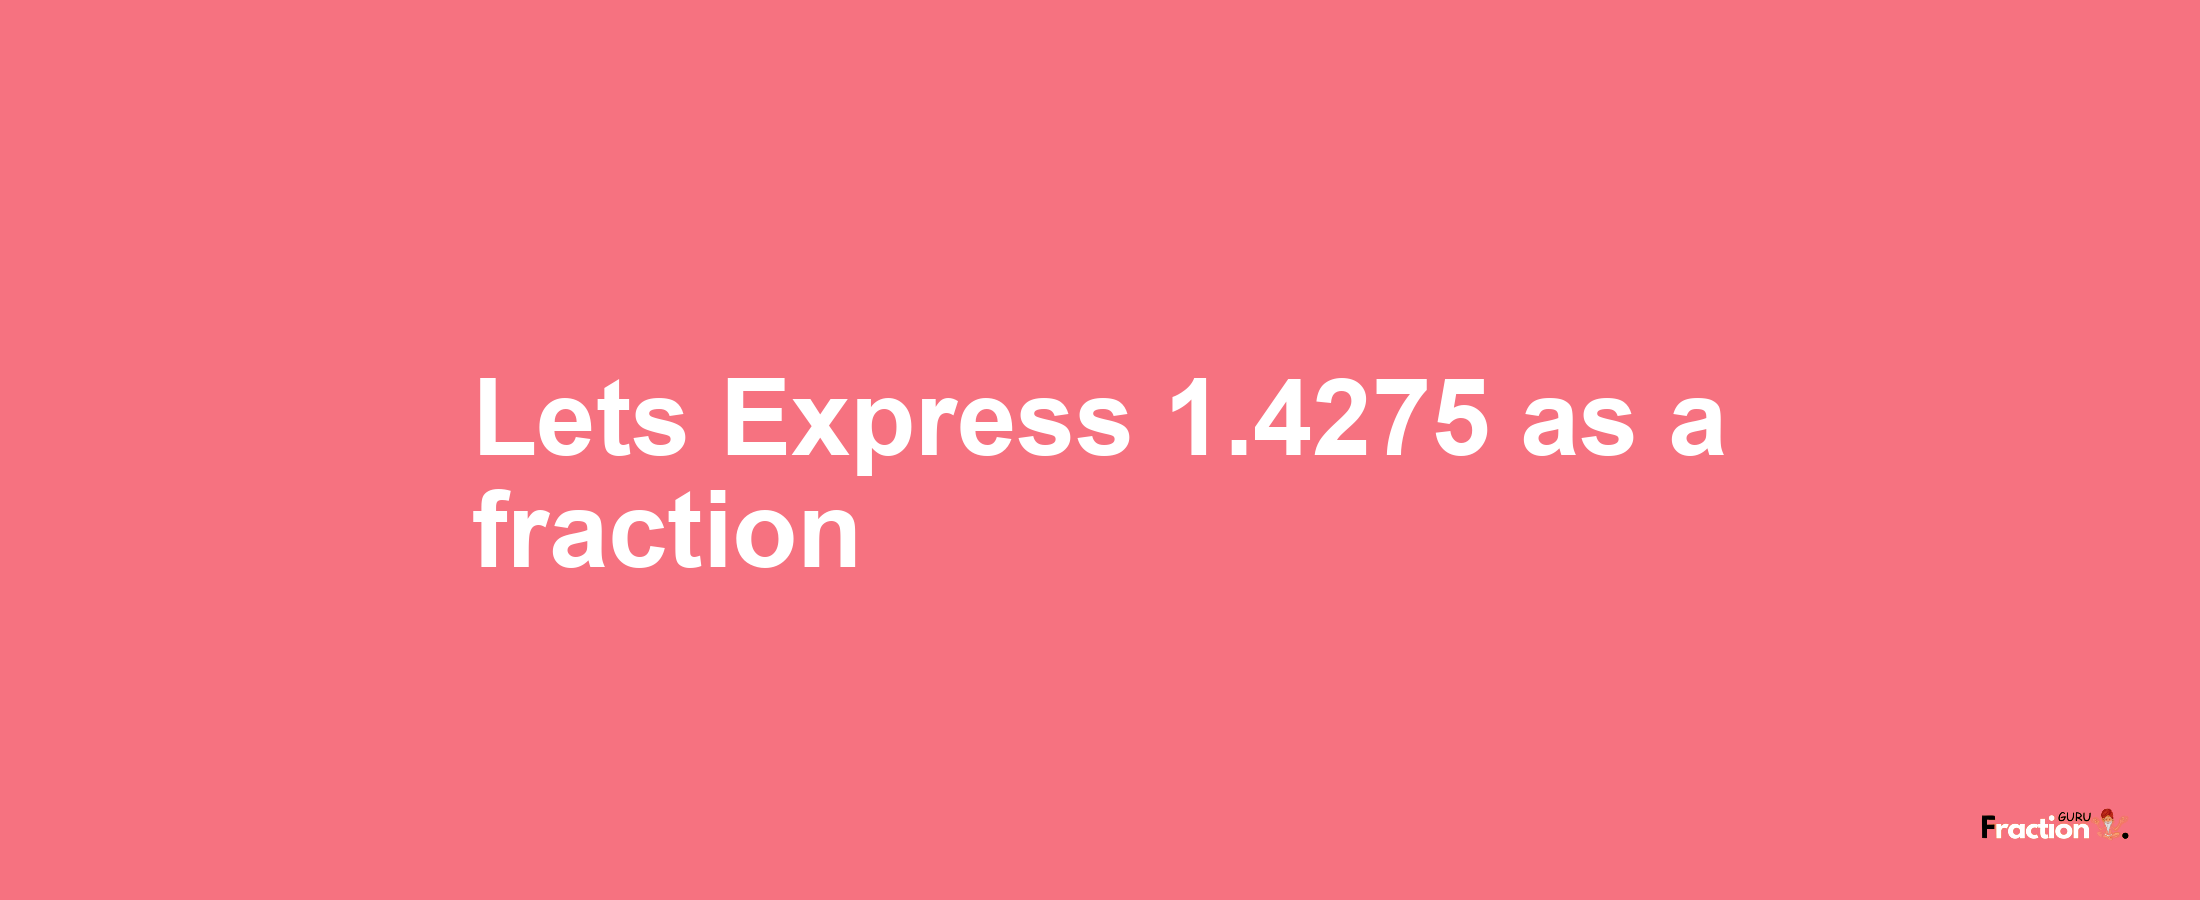 Lets Express 1.4275 as afraction